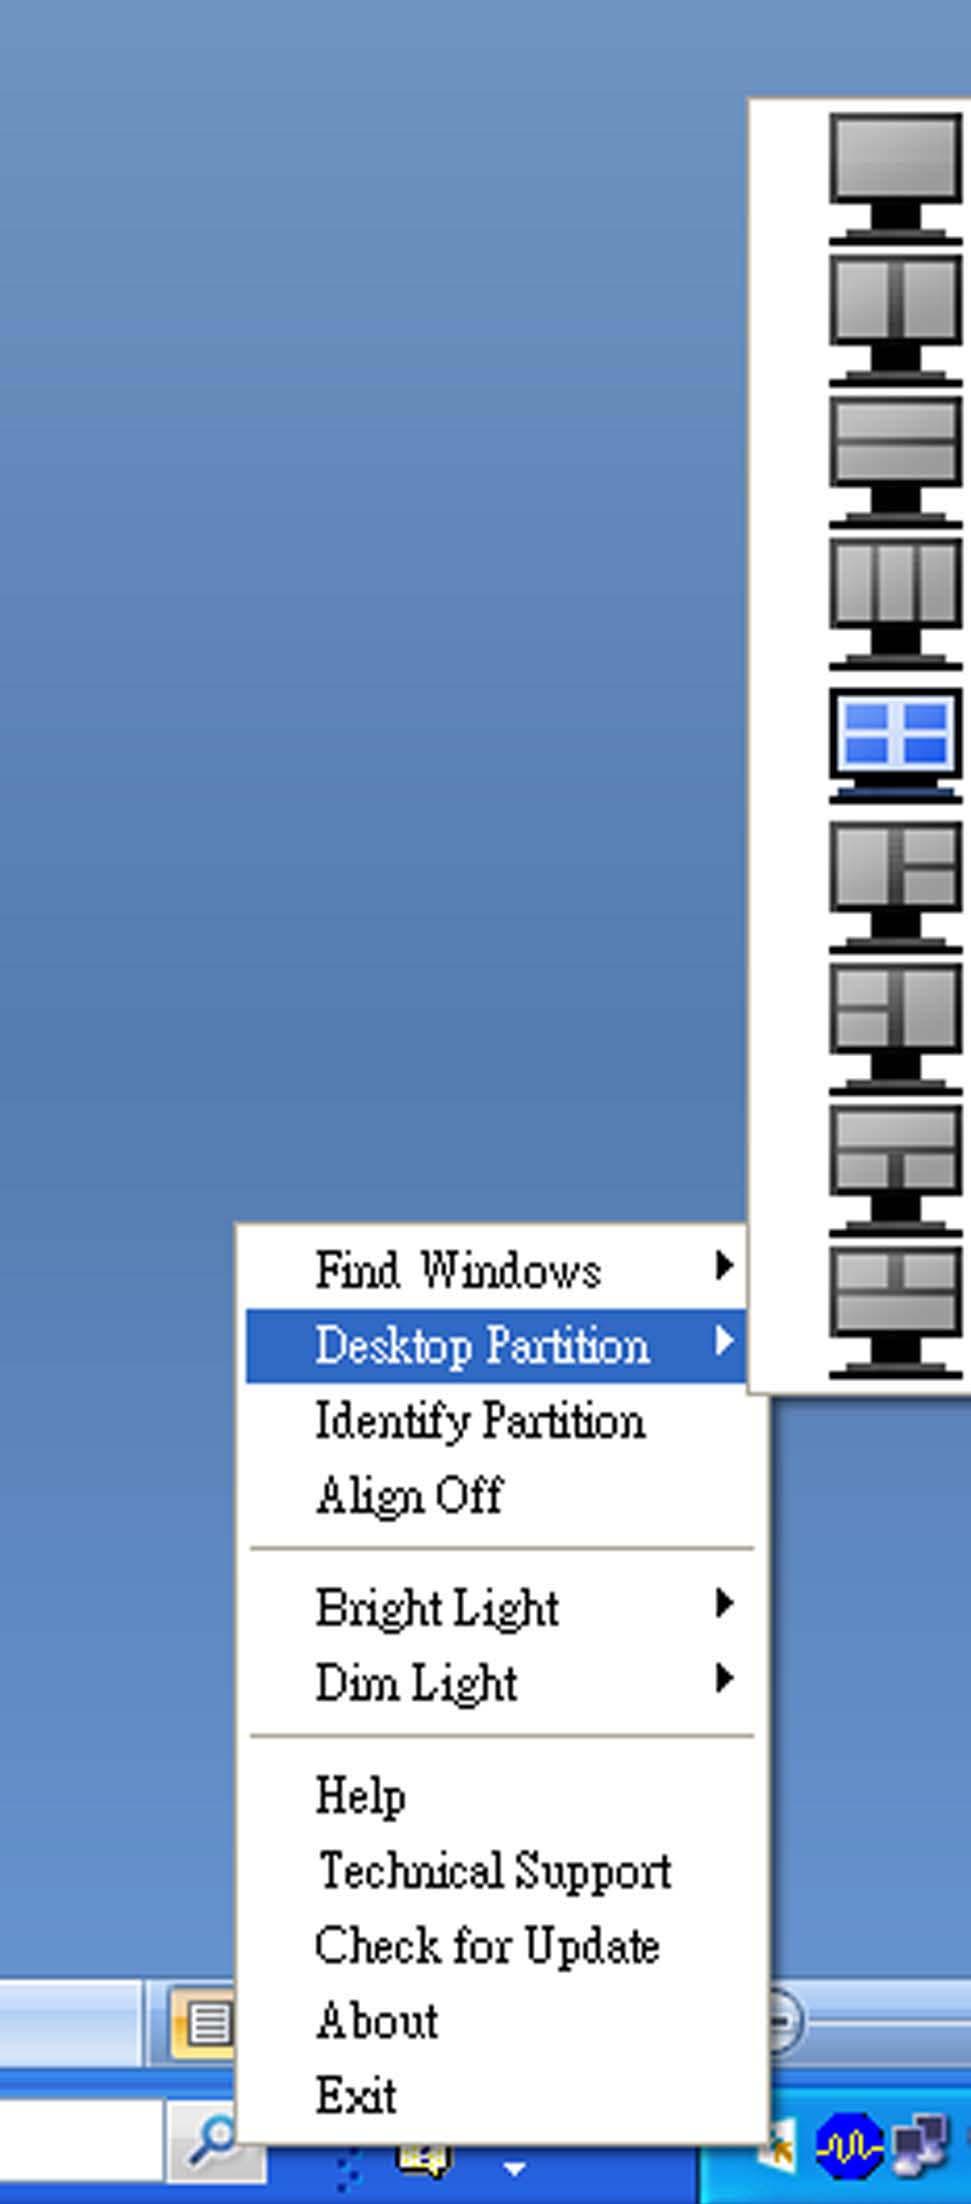 Task Tray Right Click The task tray also contains most of the features supported in the title bar (with the exception of automatically sending a window to any partition).